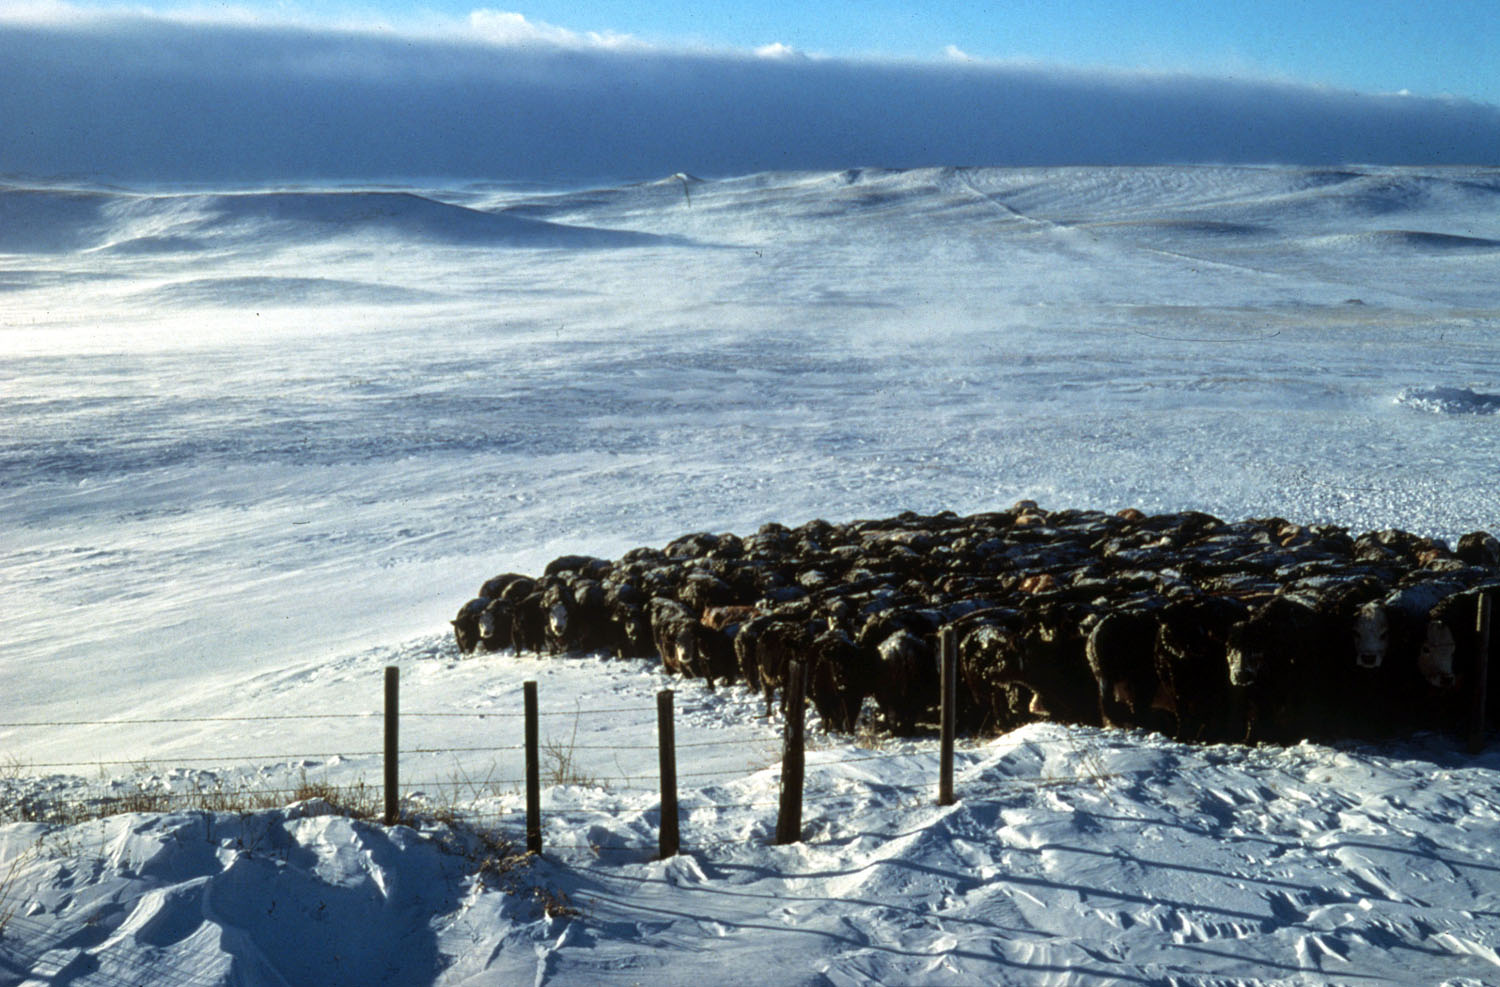 A head of cattle huddle together on the snow-covered, rolling hills on a bright, sunny, and cold winter day 